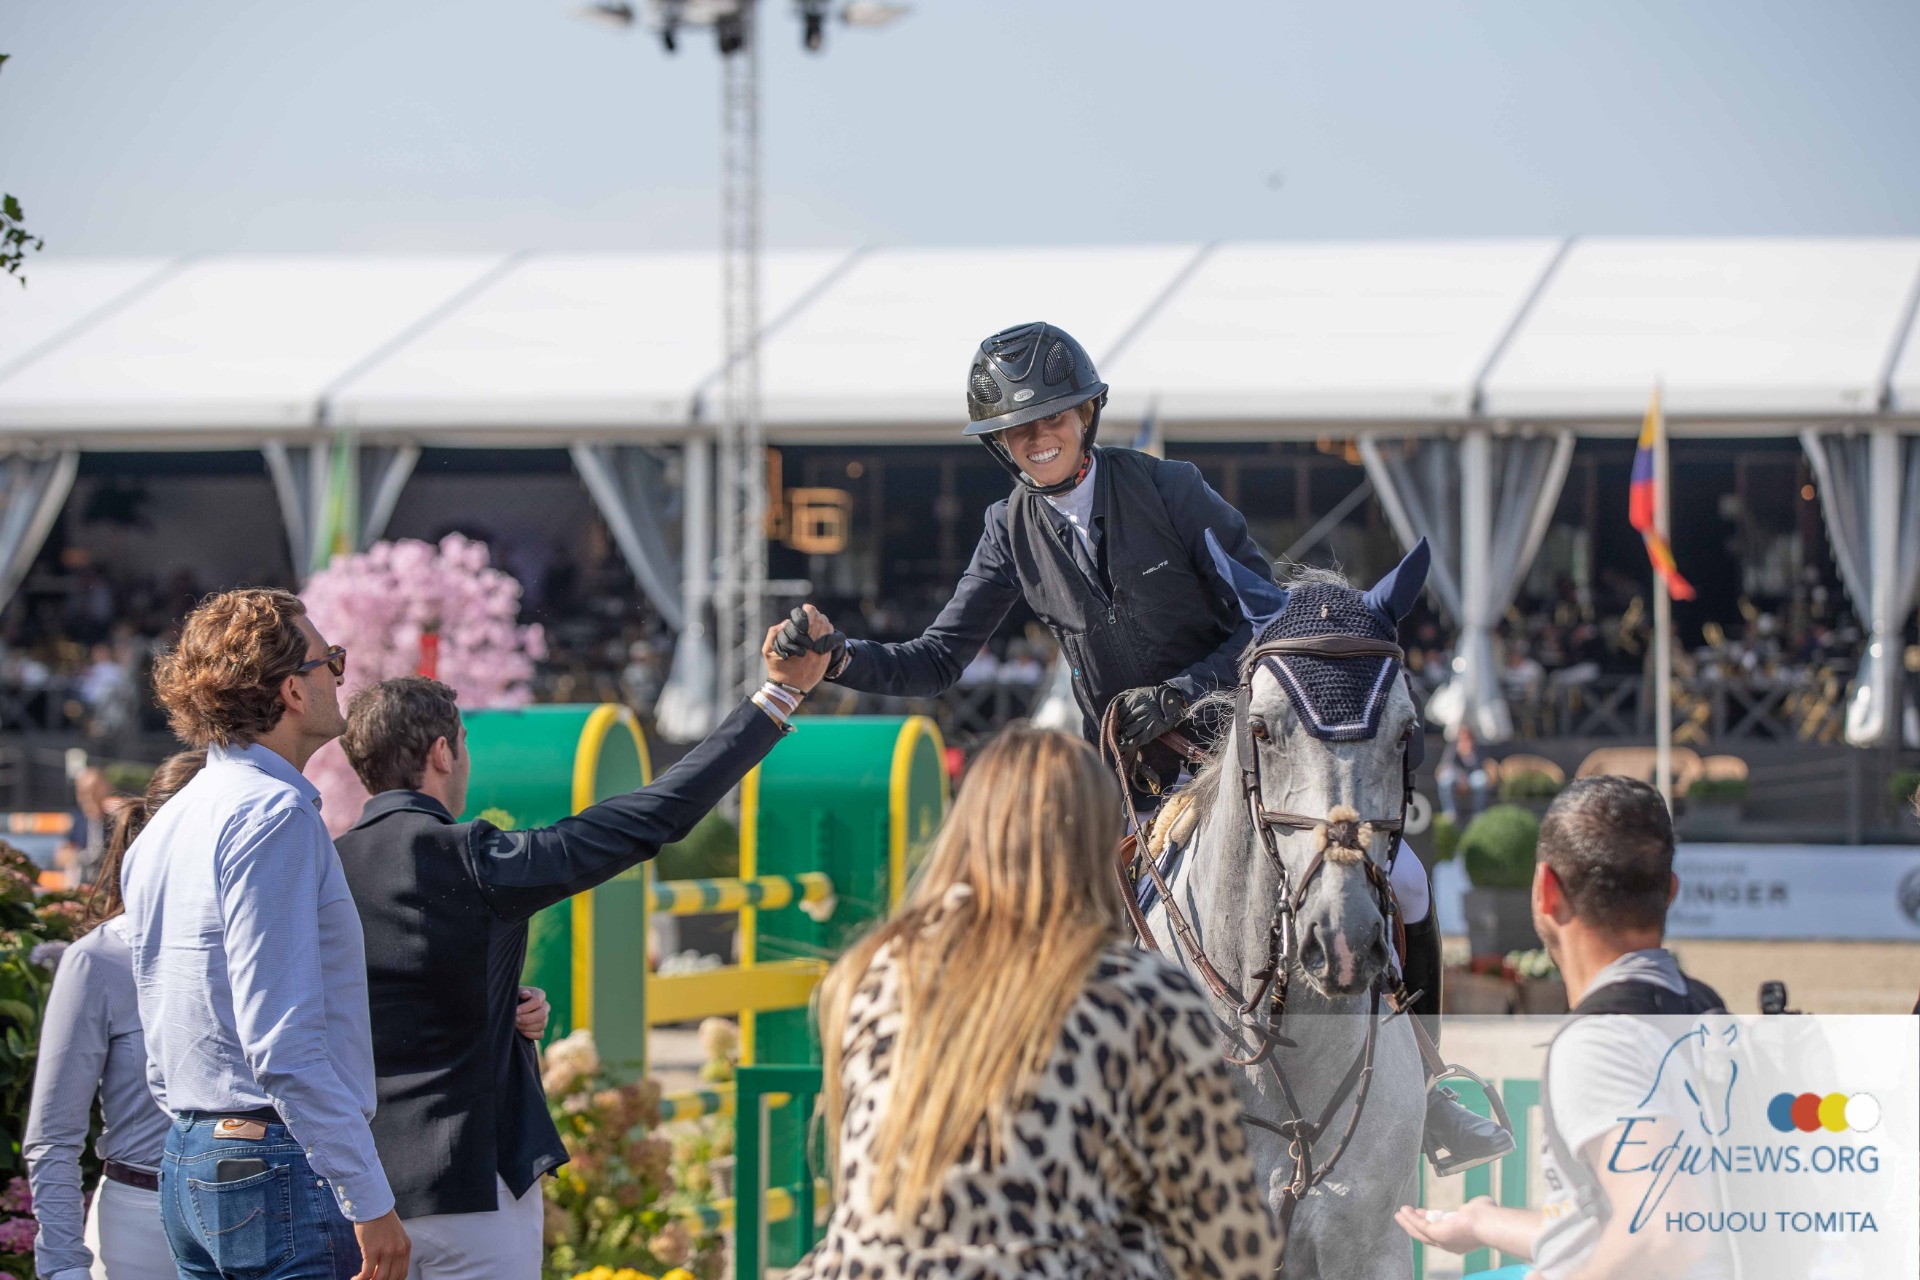 Images ... this was CSI5* Brussels Masters